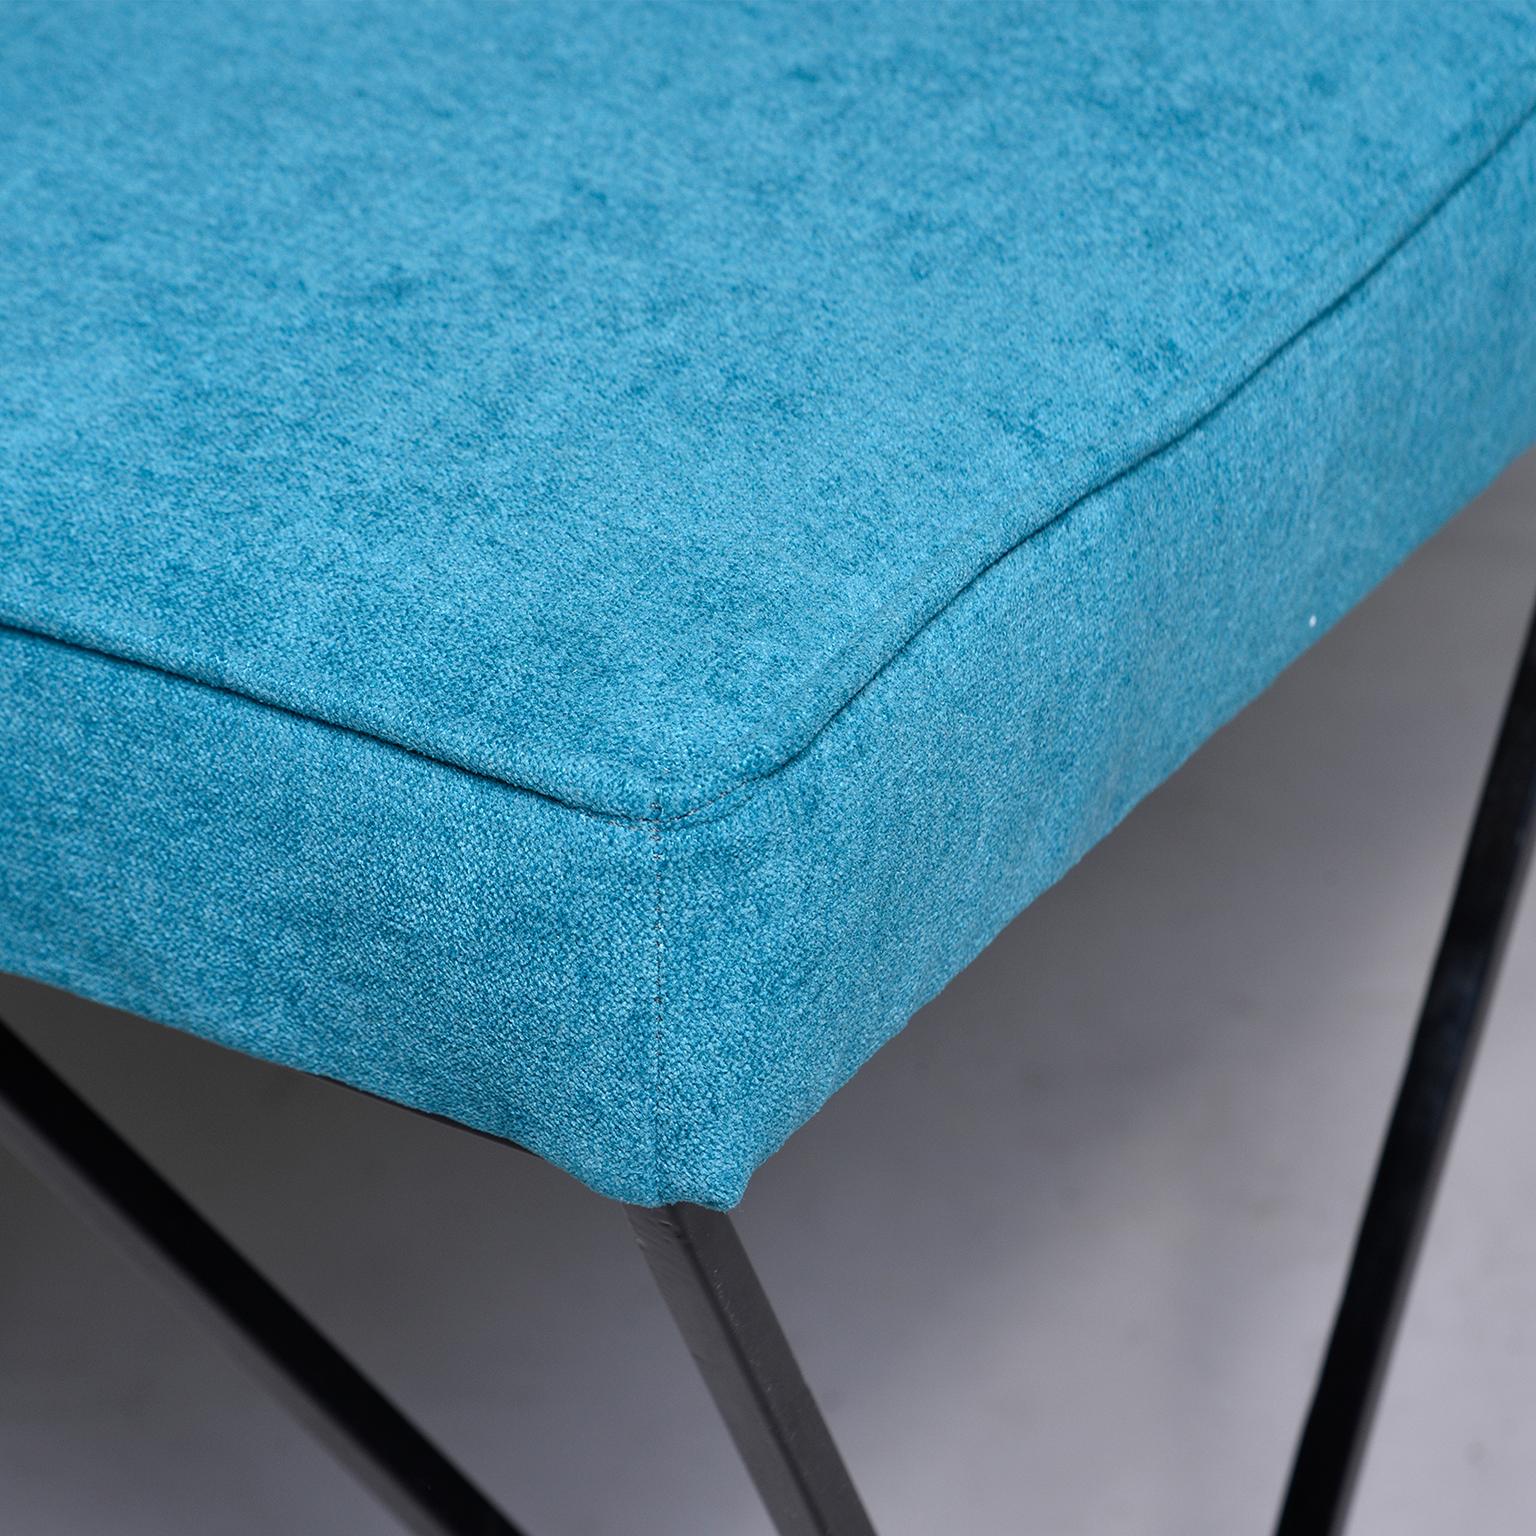 Contemporary Italian Midcentury Style Bench with Teal Fabric and Black Metal Legs